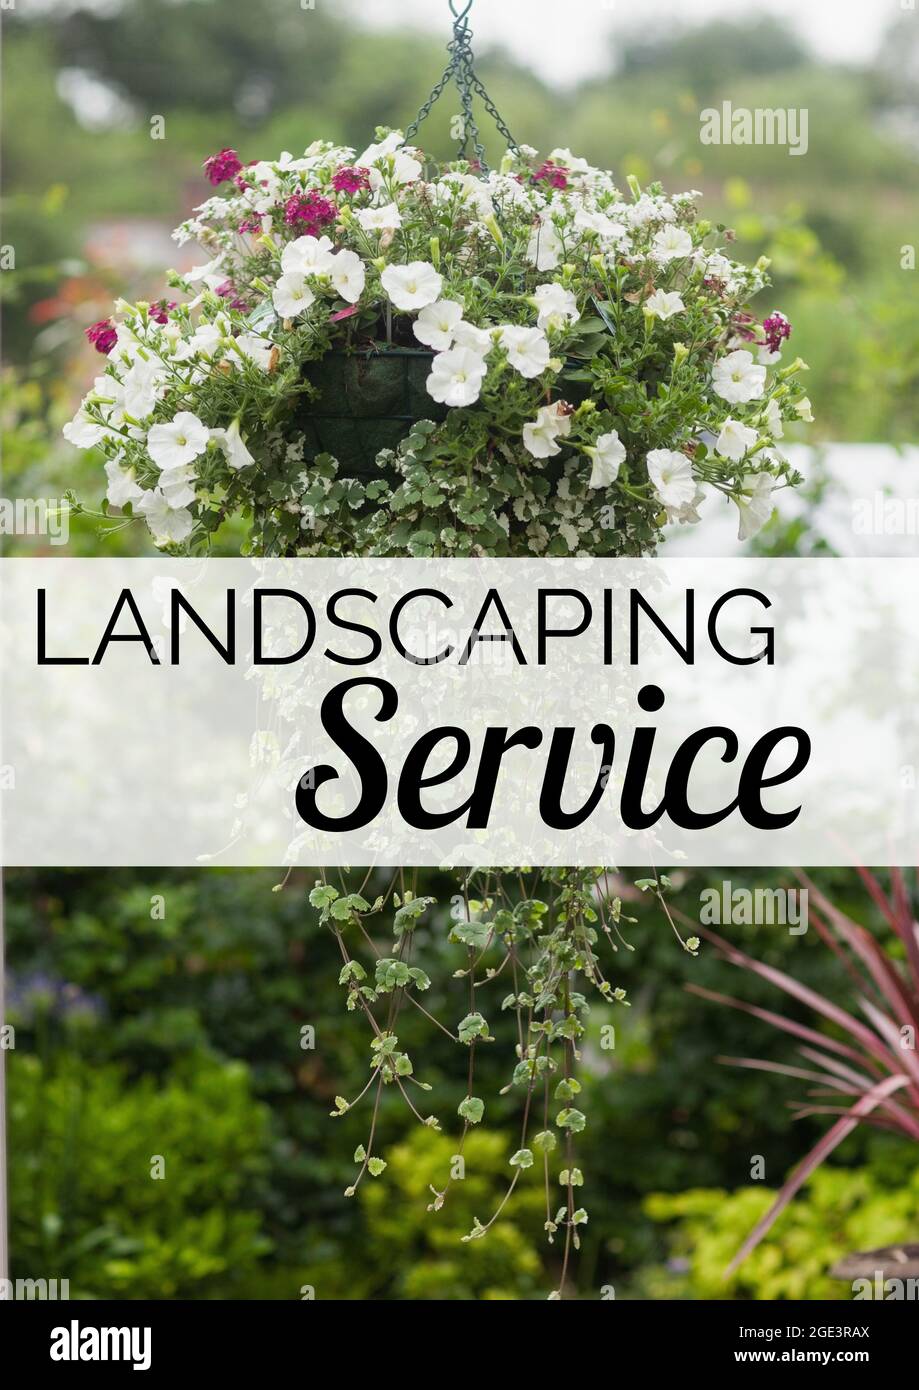 Composition of green gardening services text over colourful flowers hanging Stock Photo